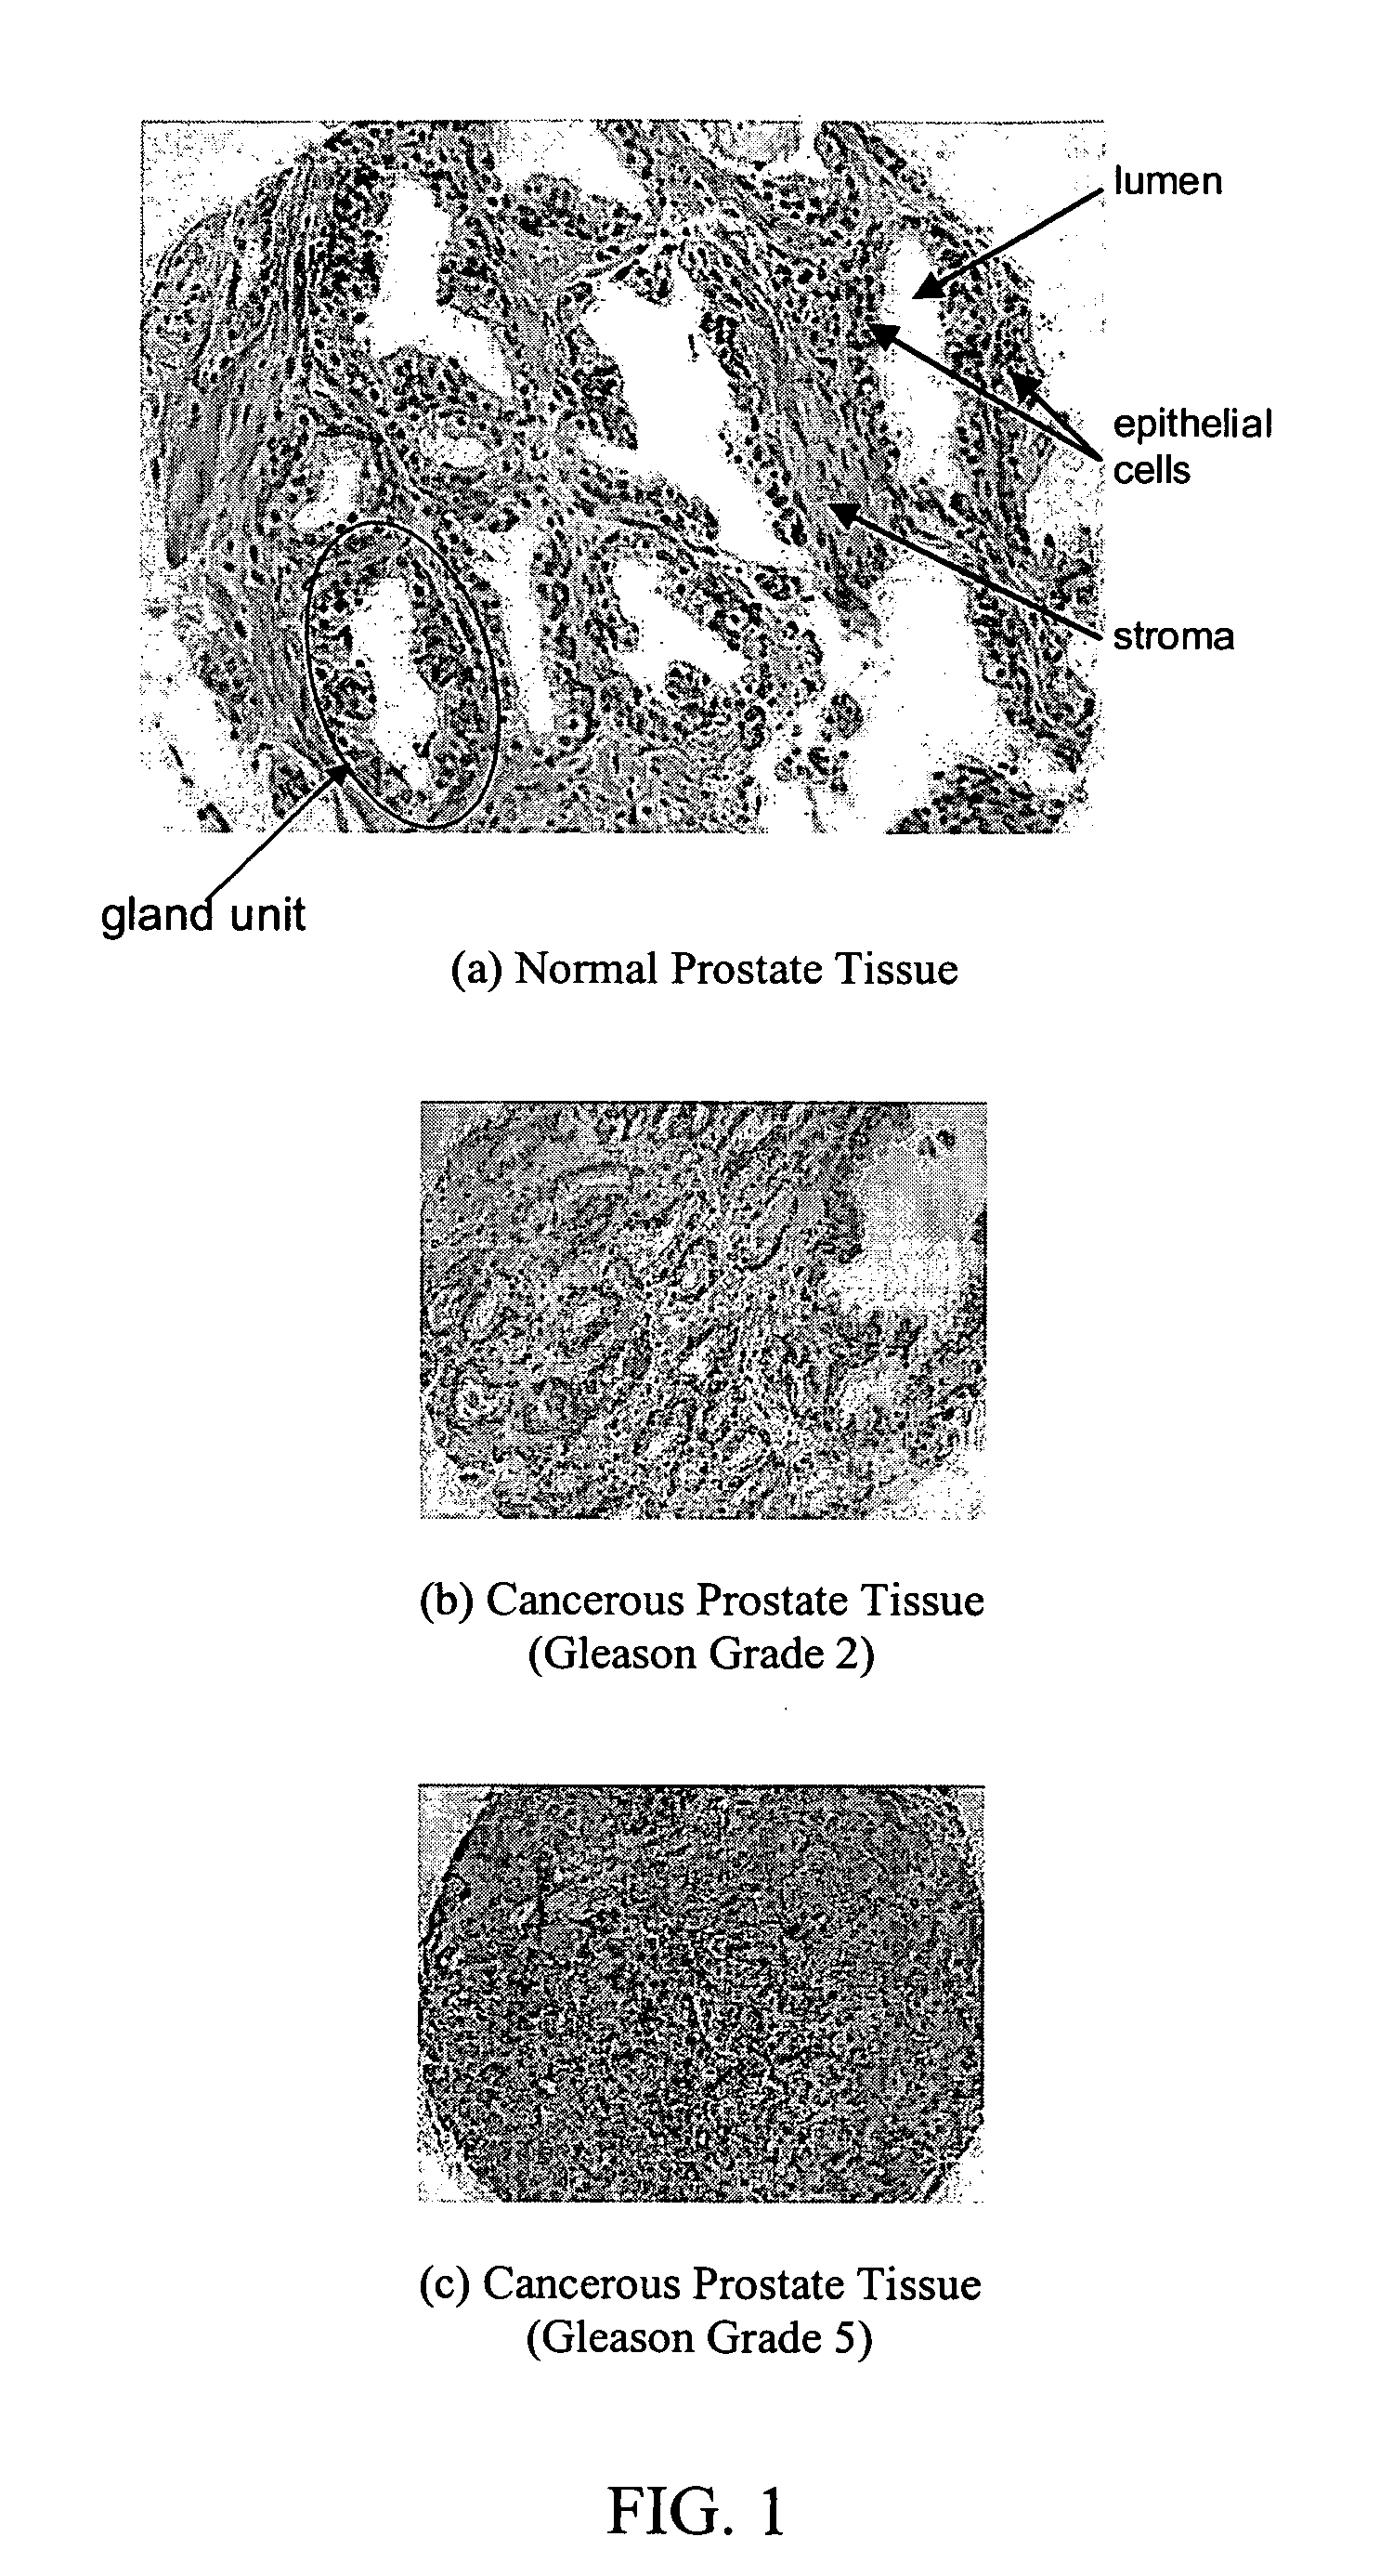 Systems and methods for automated diagnosis and grading of tissue images